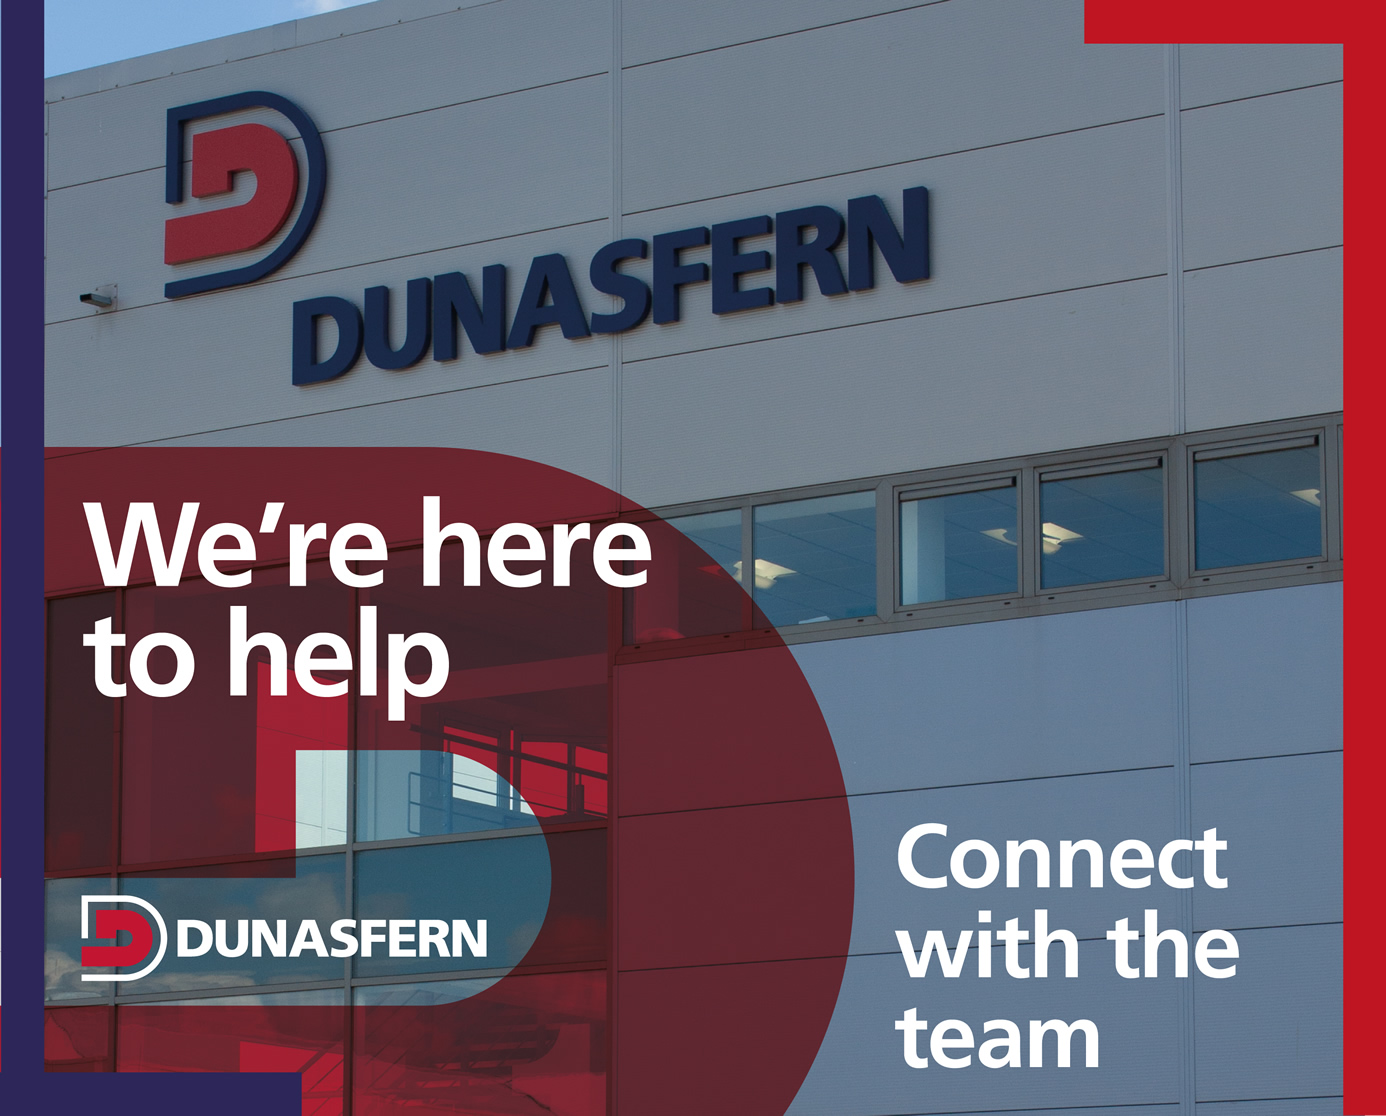 Dunasfern - We're here to help. Connect with the team